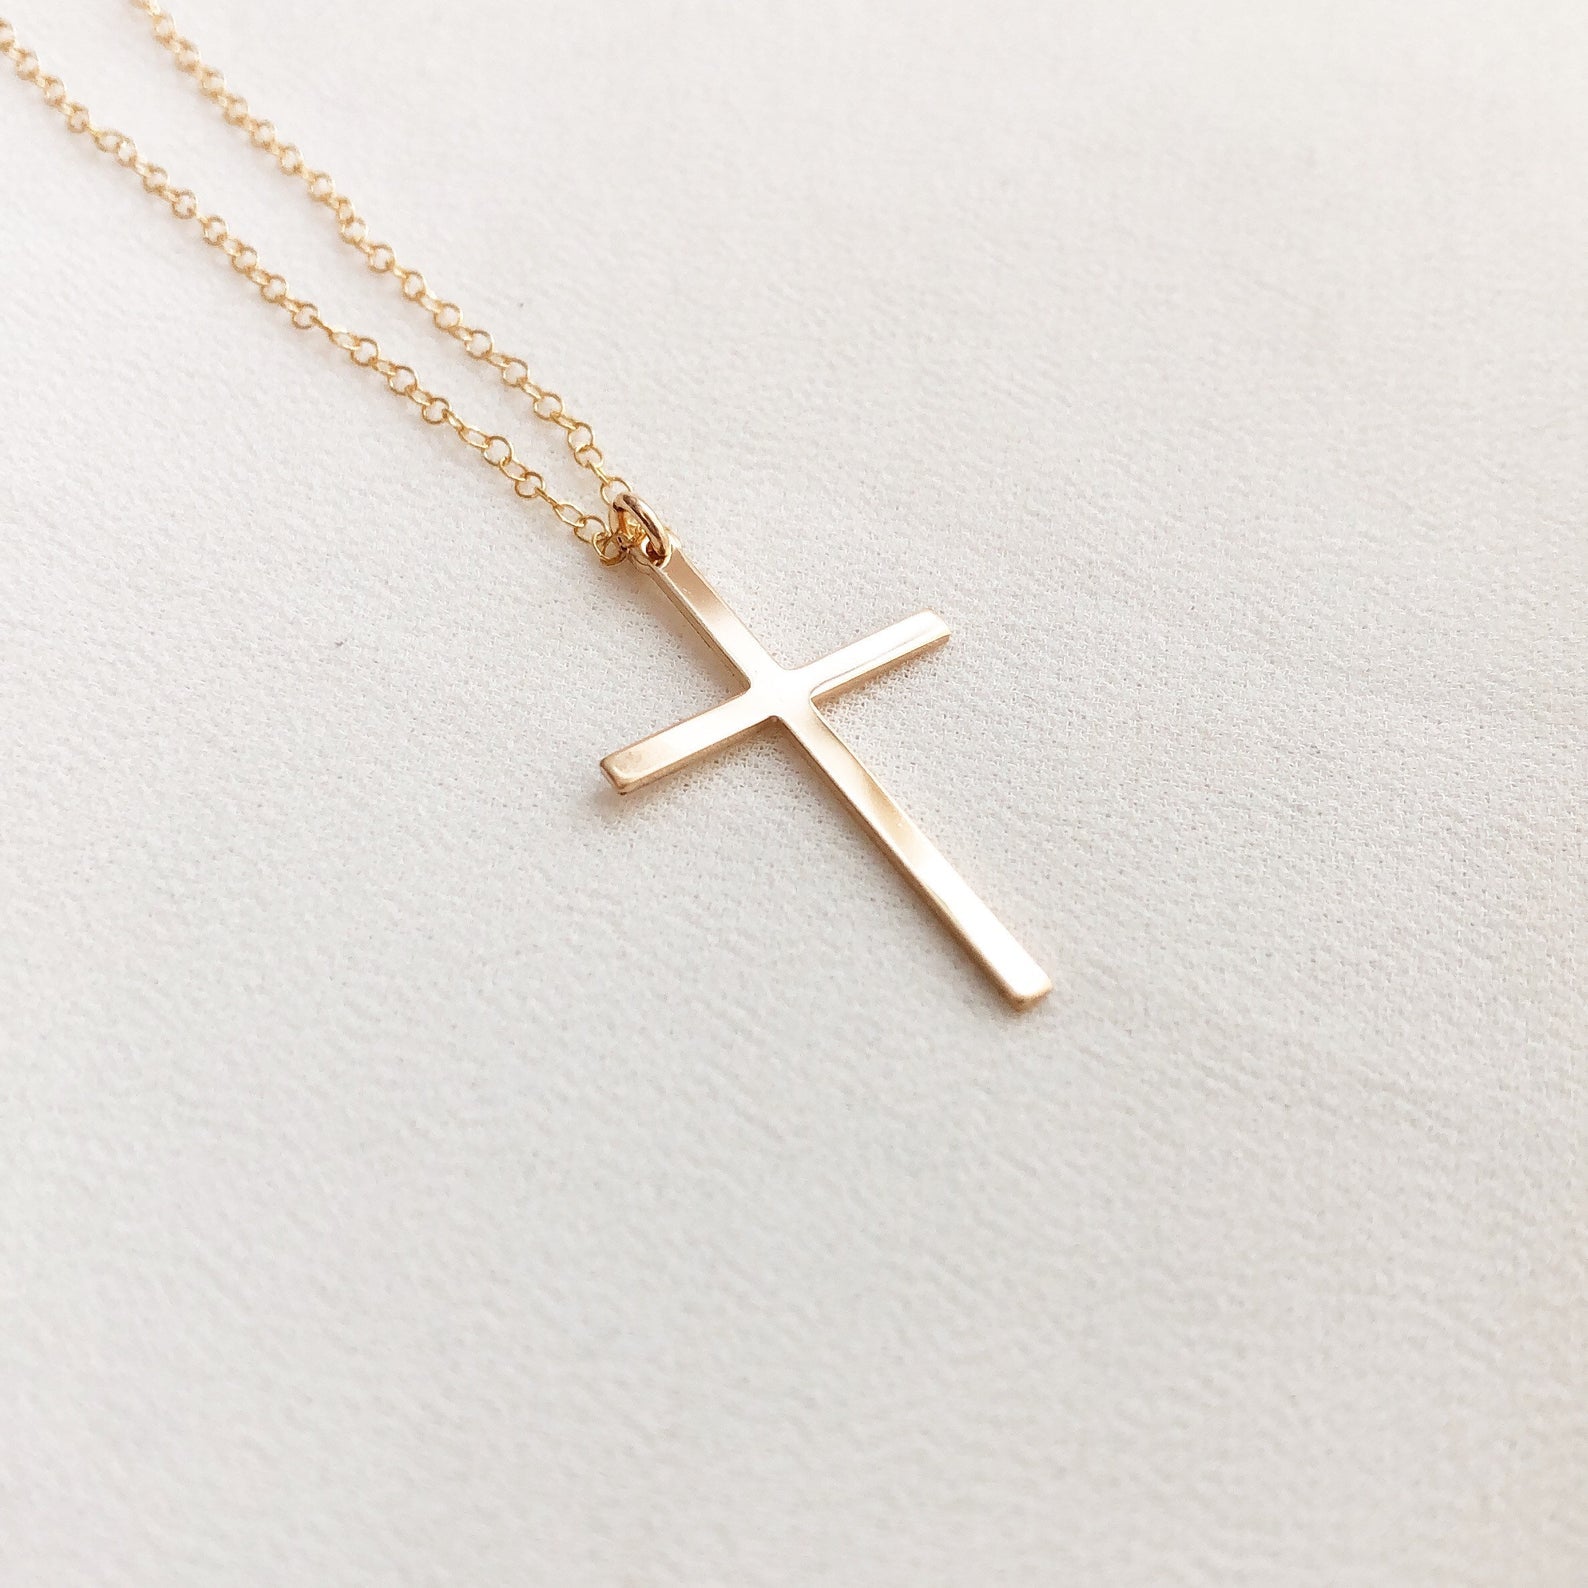 14K Gold Cross Necklace, Cross Necklace, Religious Jewelry, Religious Gift, Simple Cross Necklace, Long Layering Necklace, Gift For Her